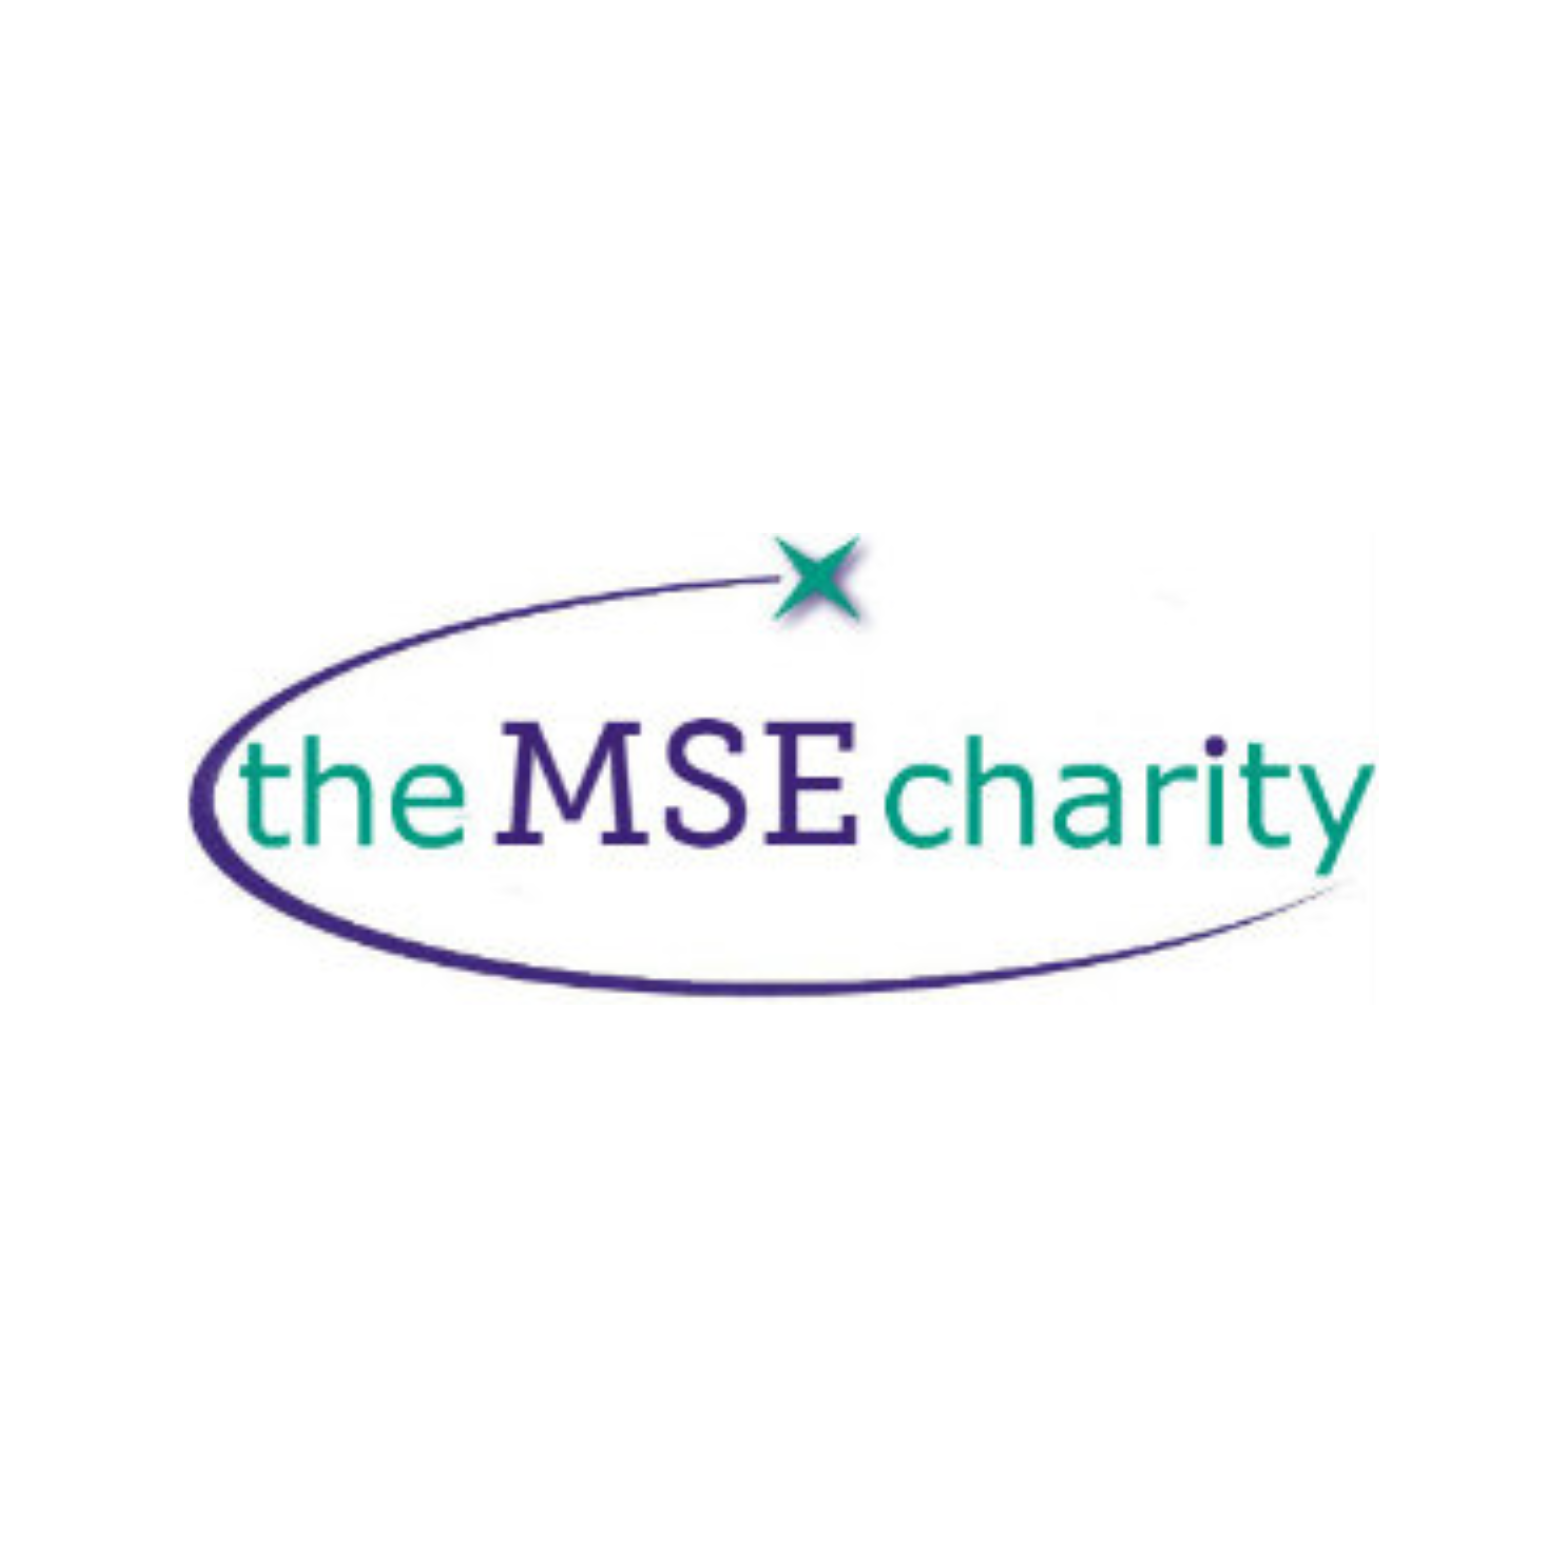 The MSE Charity